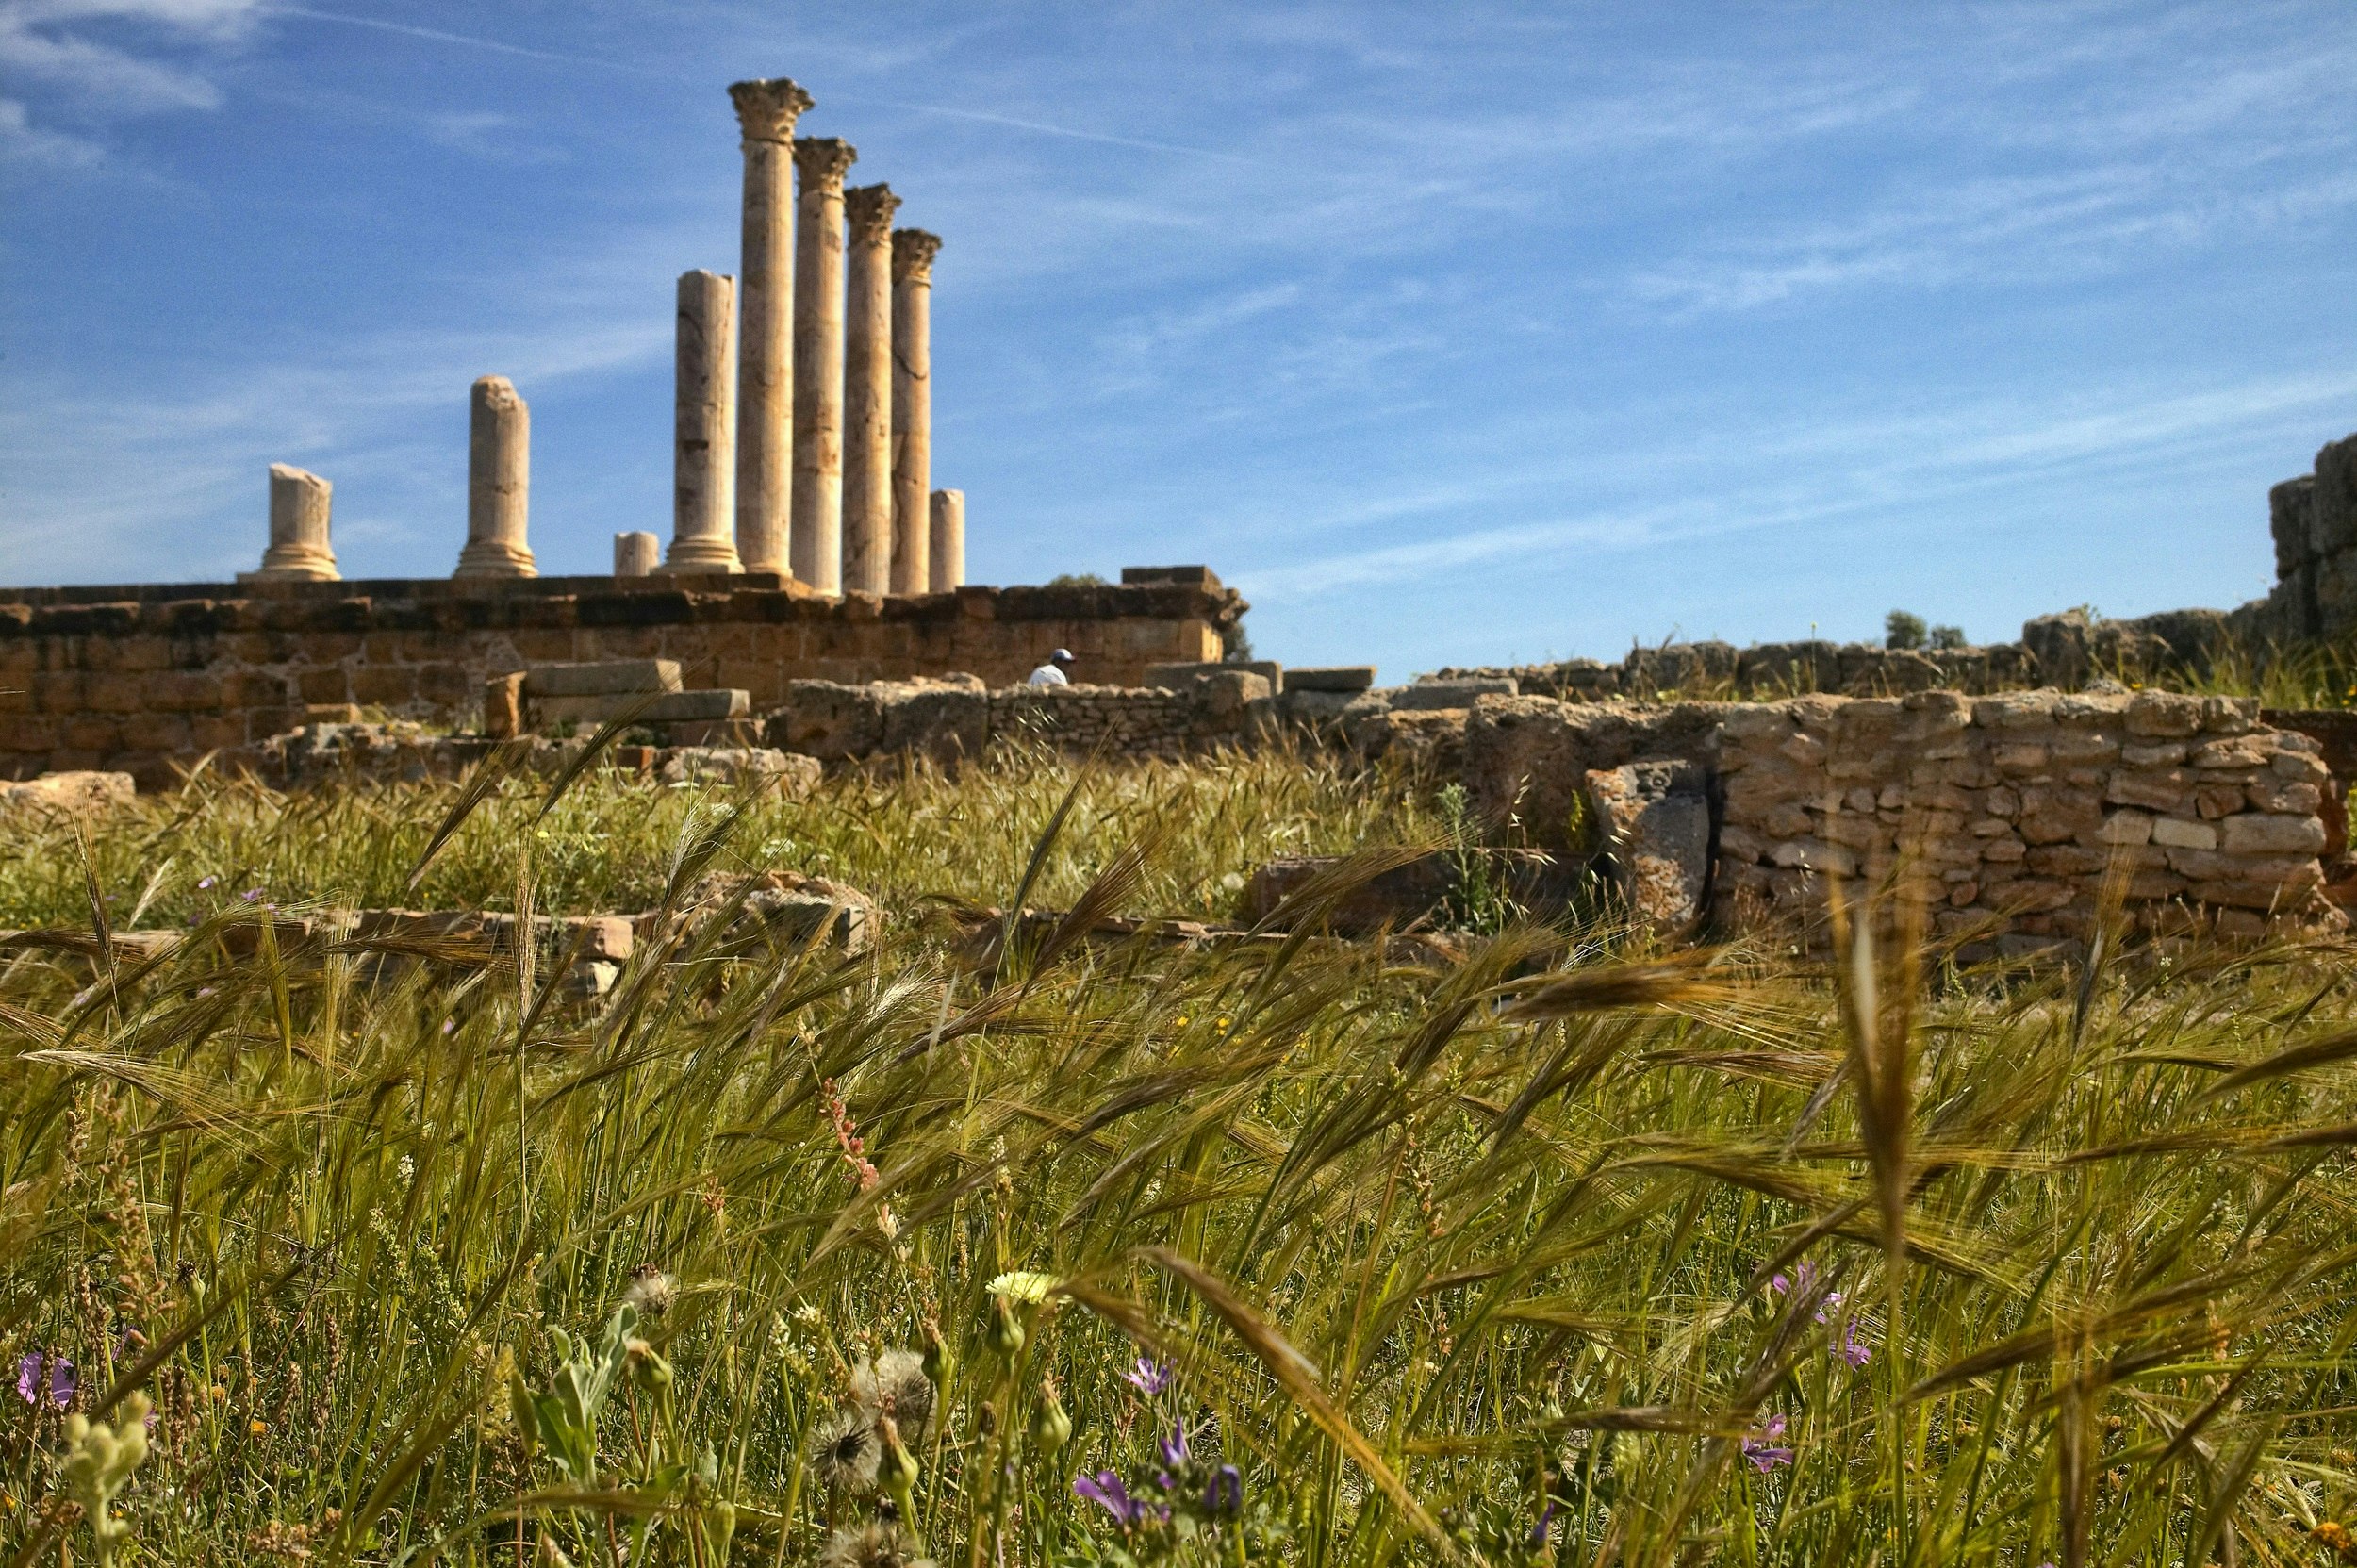 In the foreground are long grasses and wildflowers; in the background are stone foundations and a row of stone Roman columns, only four of which reach full height.